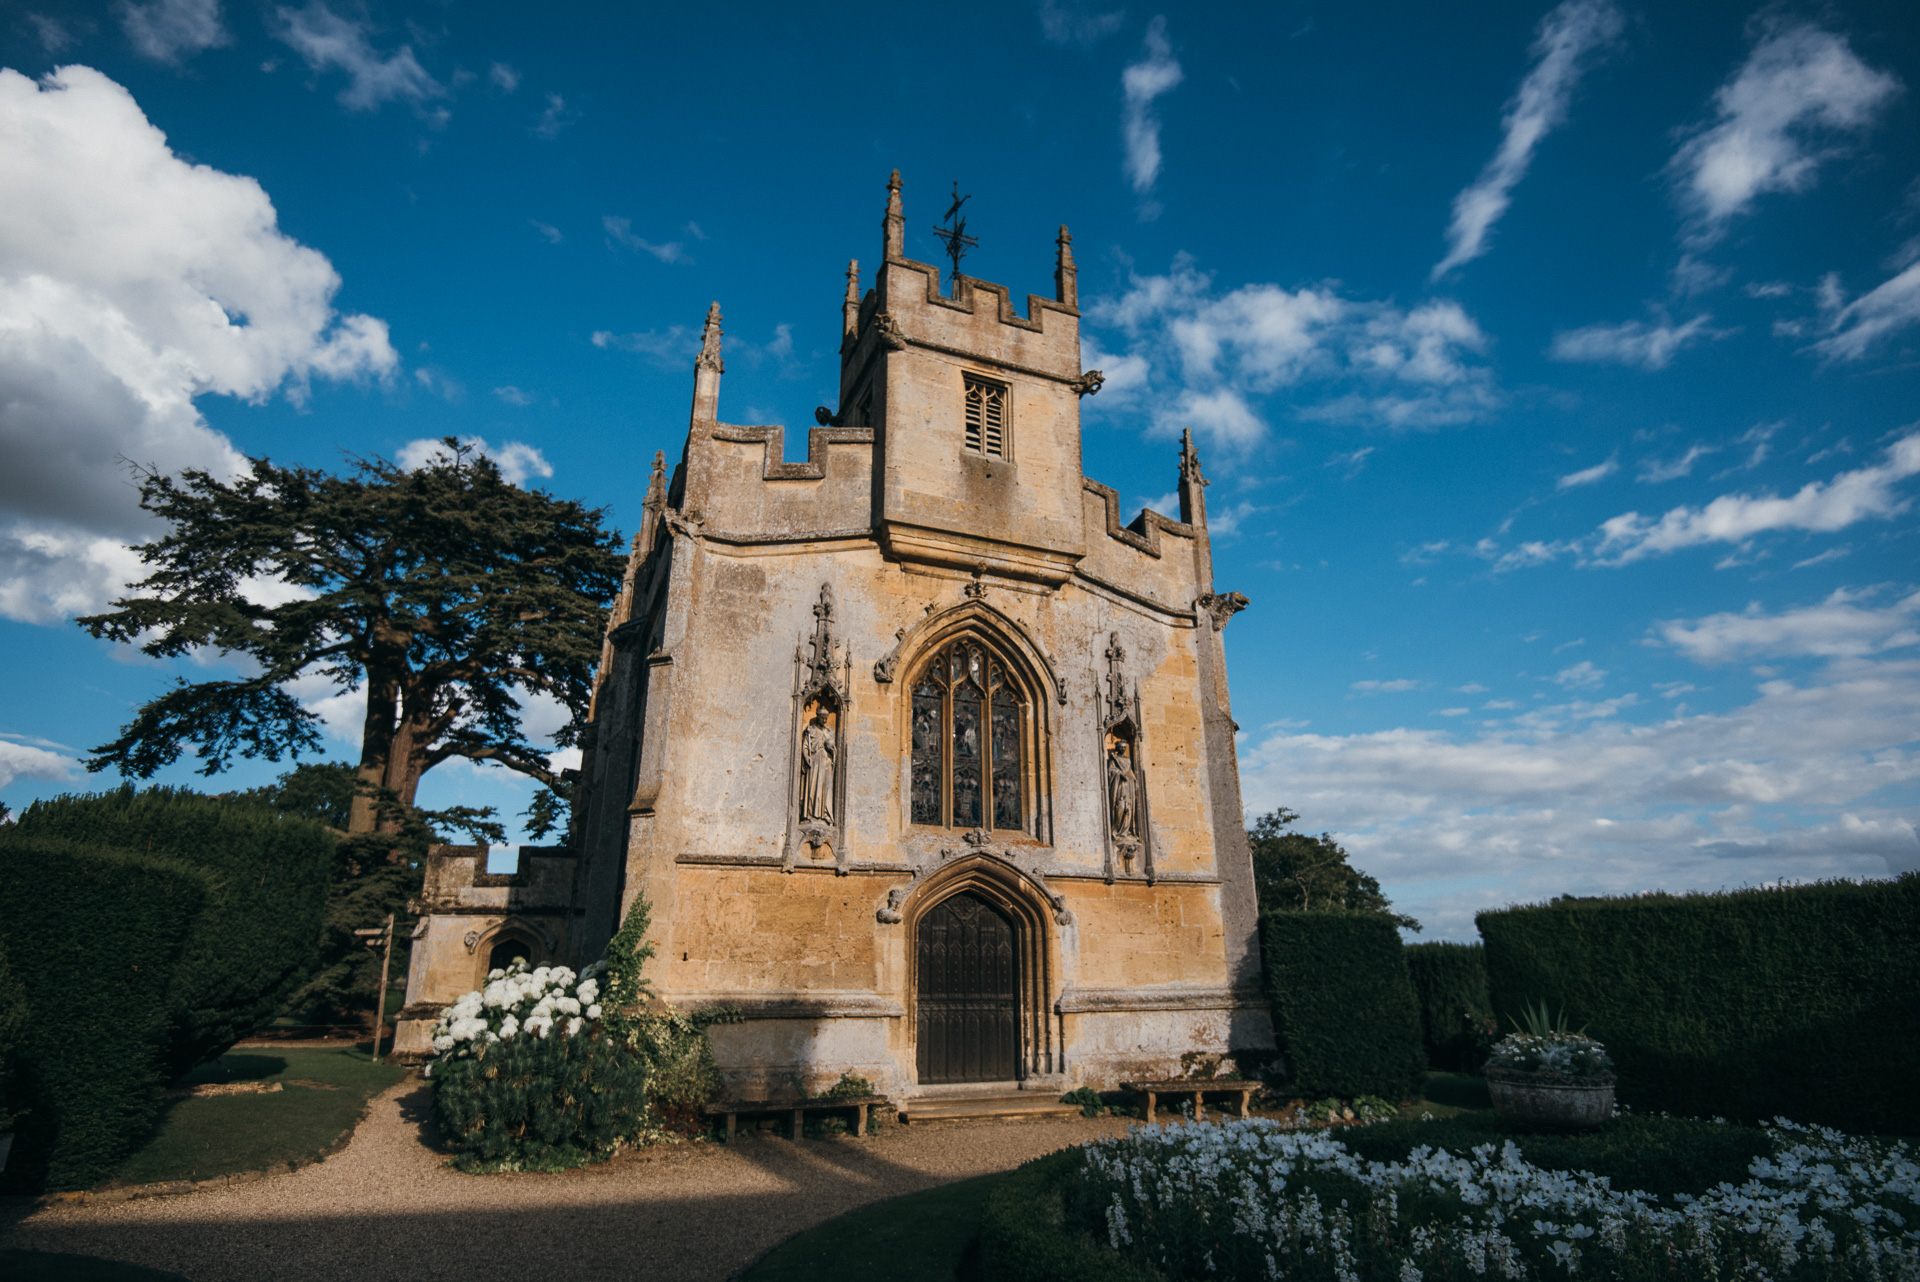 Church at Sudeley castle